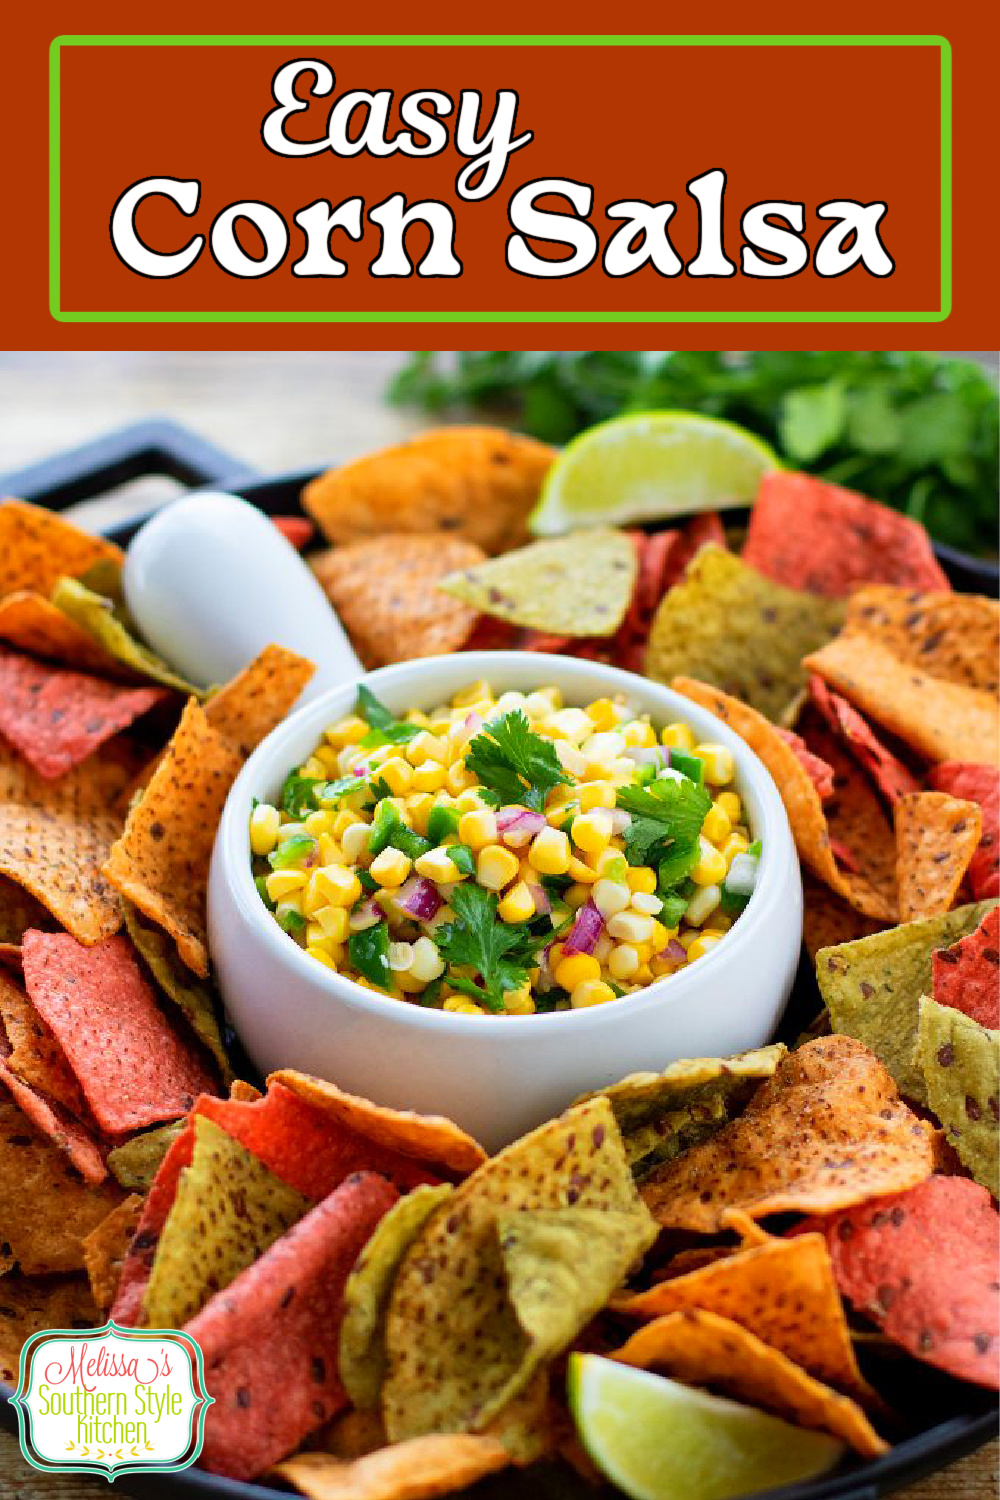 This Easy Corn Salsa recipe can be served as a condiment for salads, tacos, burrito bowls or as an appetizer with tortilla chips for dipping. #cornrecipes #easycornsalsa #salsa #salsarecipes #corn #salsarecipe #freshcornrecipes #cornonthecob #roastedcorn